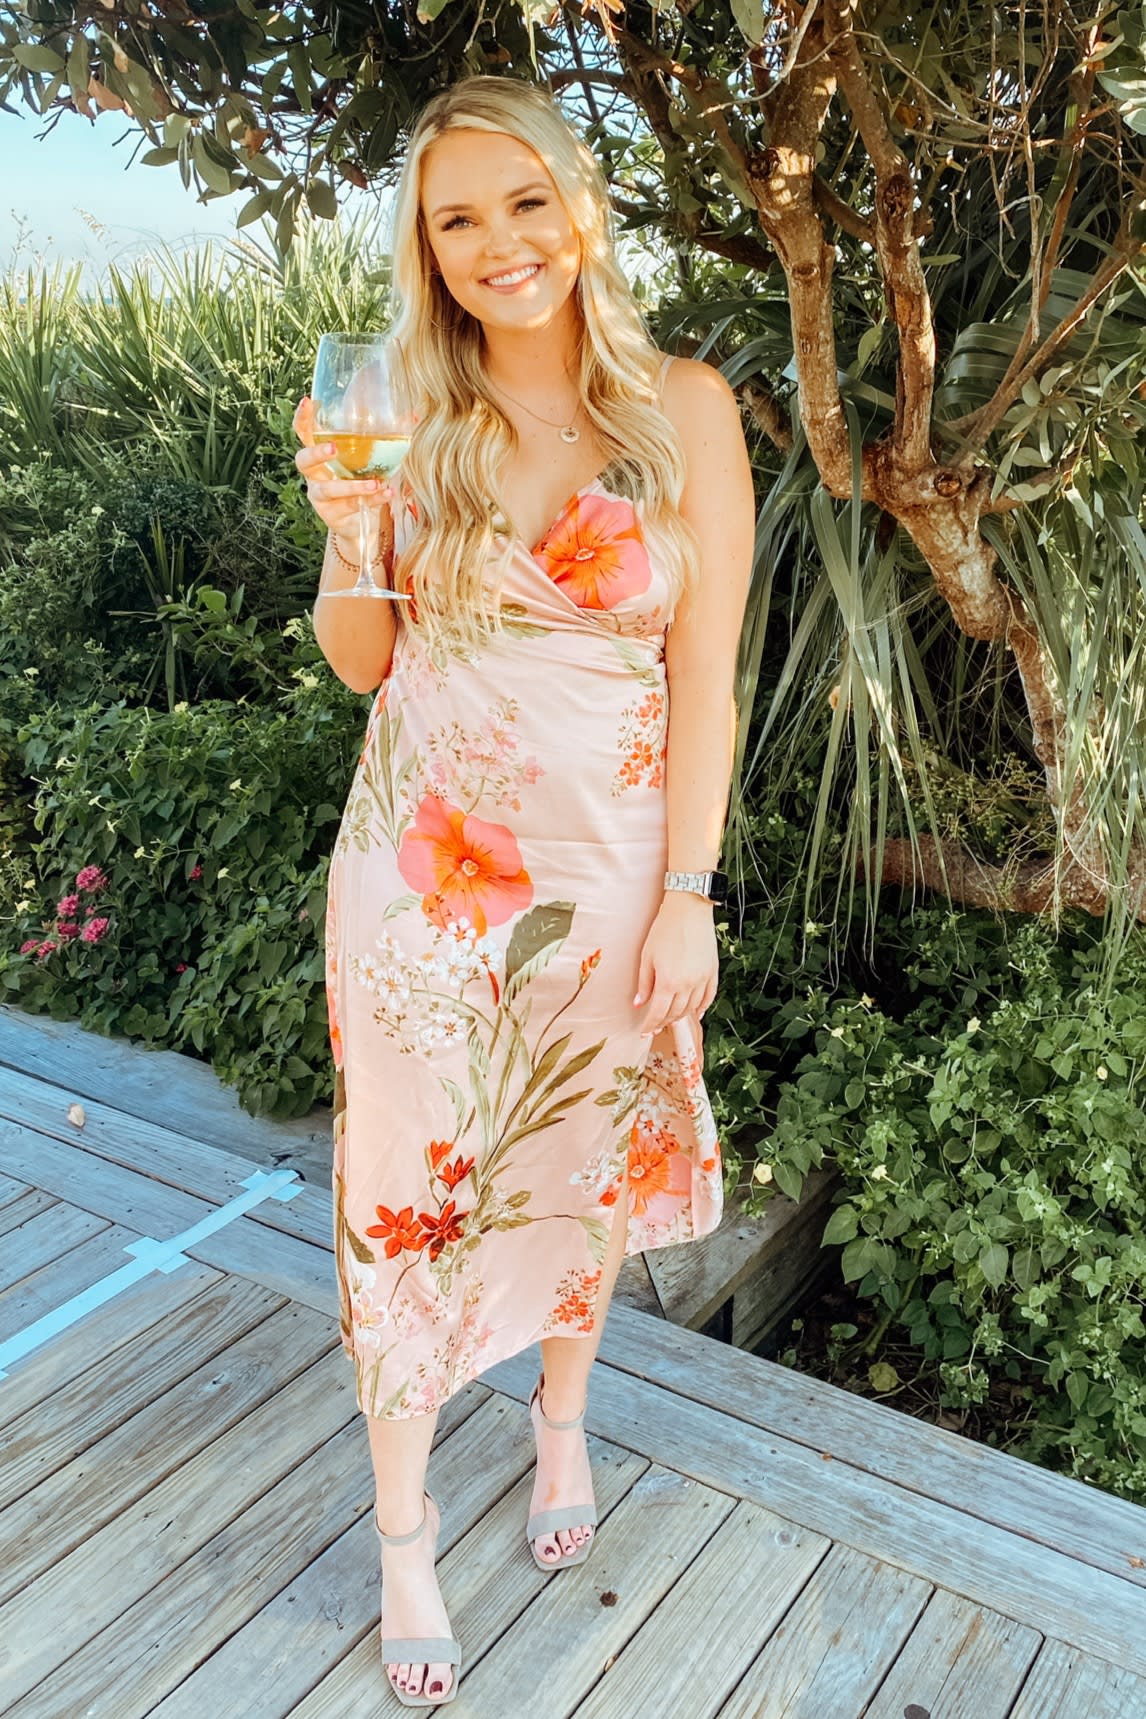 Dresses For Beach Weddings: The Complete Guest Guide - Lulus.com Fashion  Blog